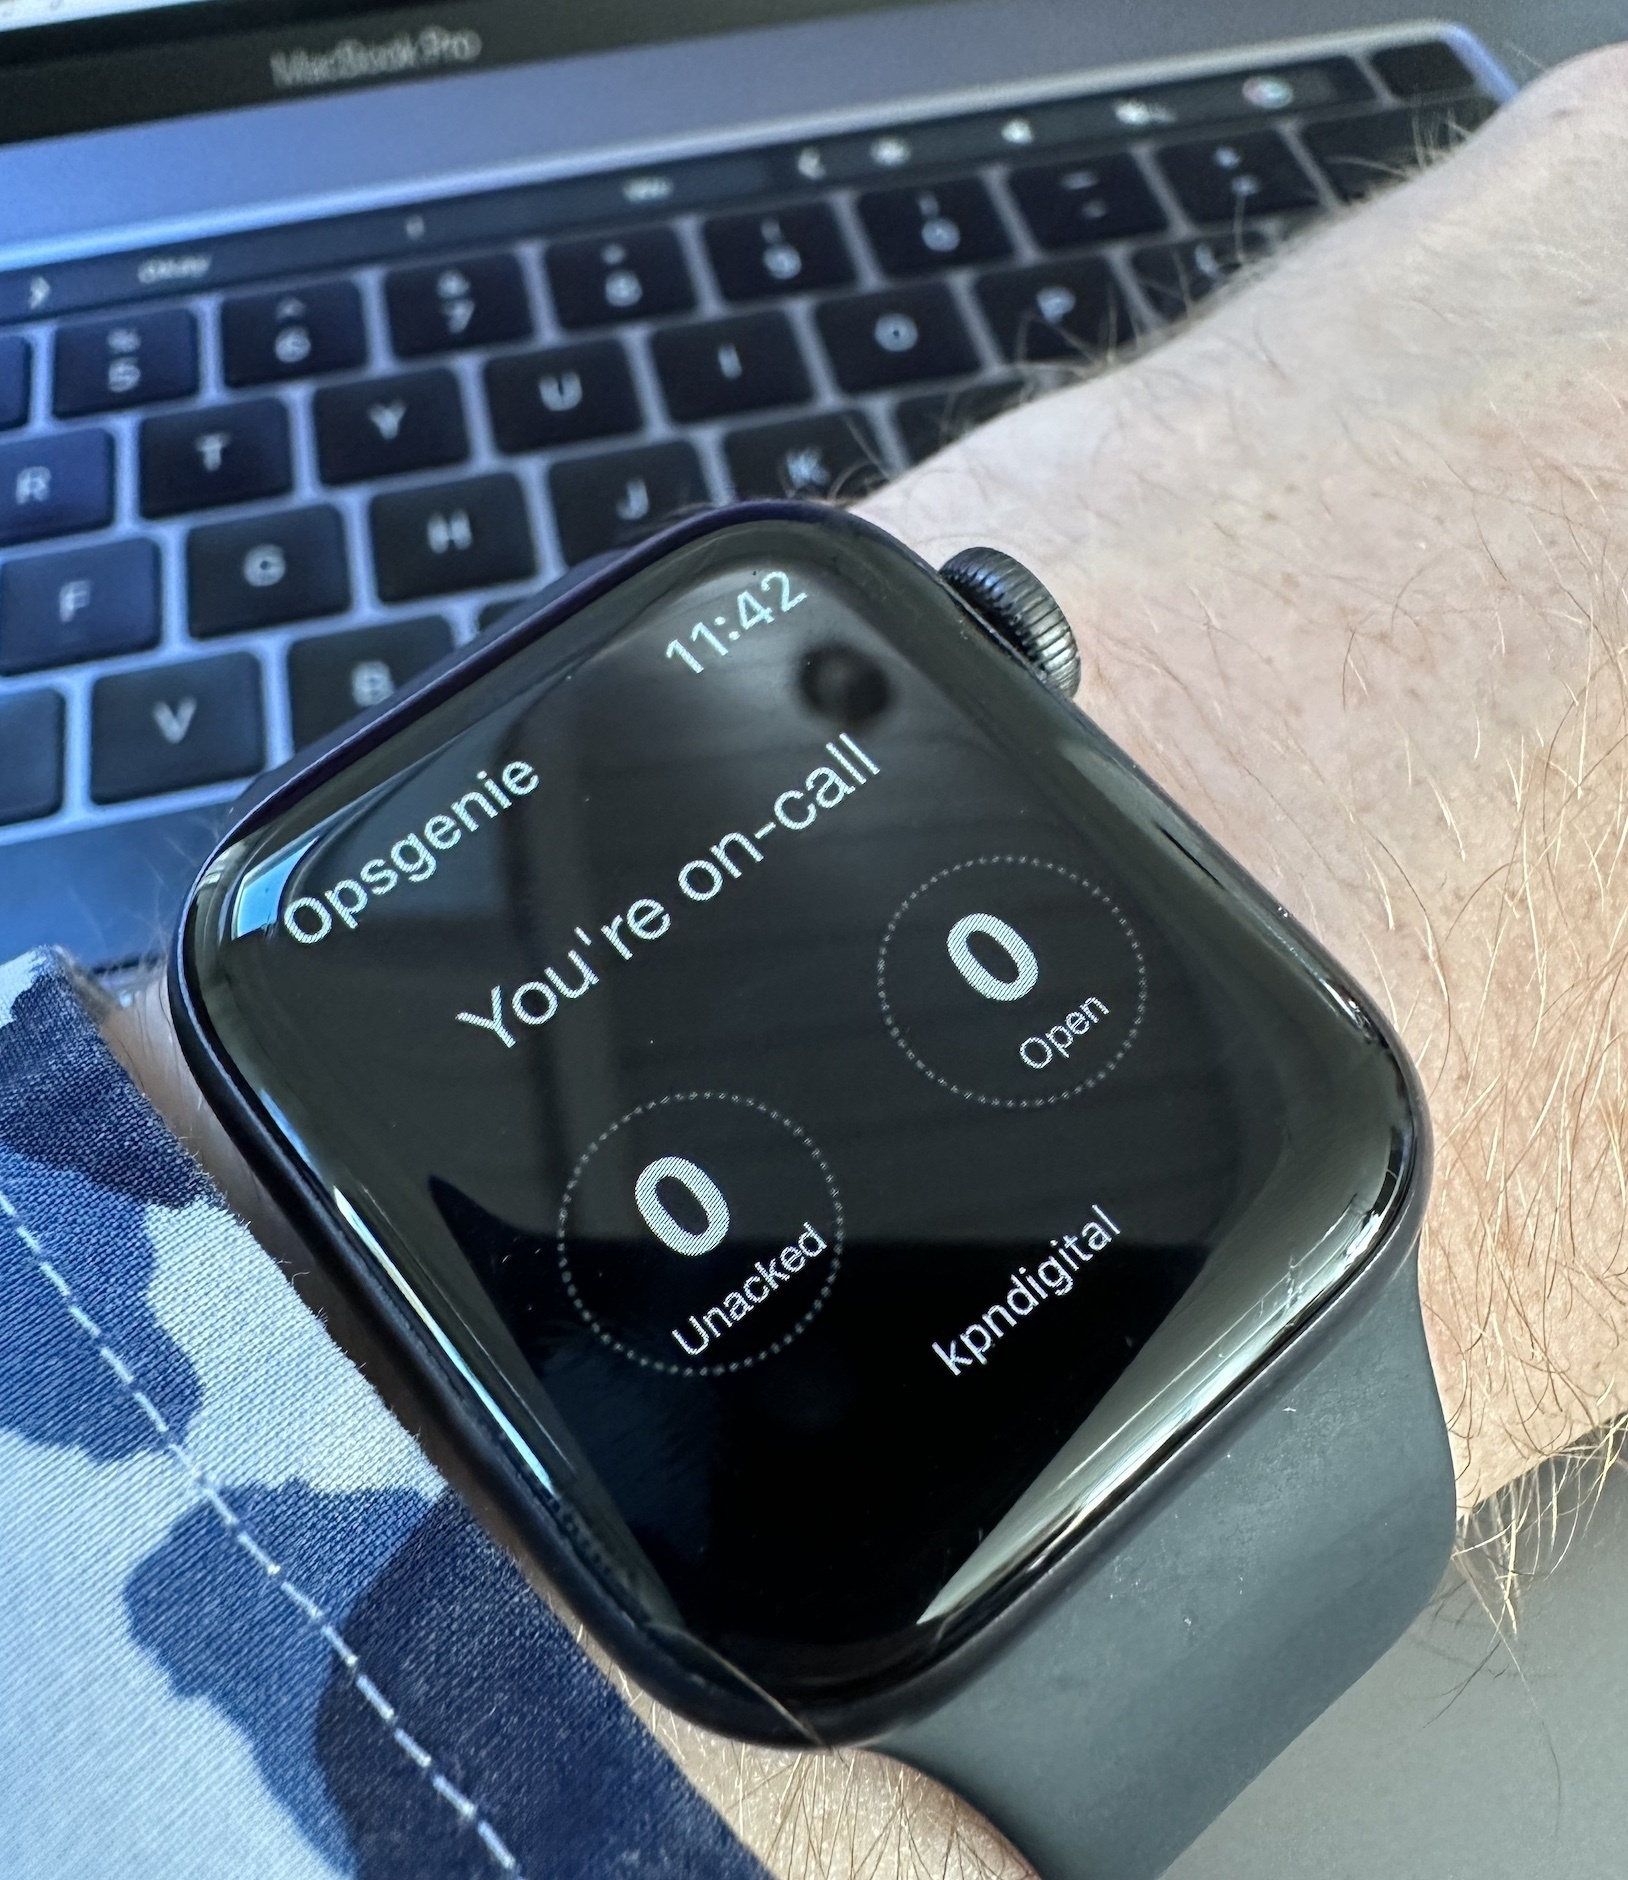 Apple Watch showing that I'm on call. 